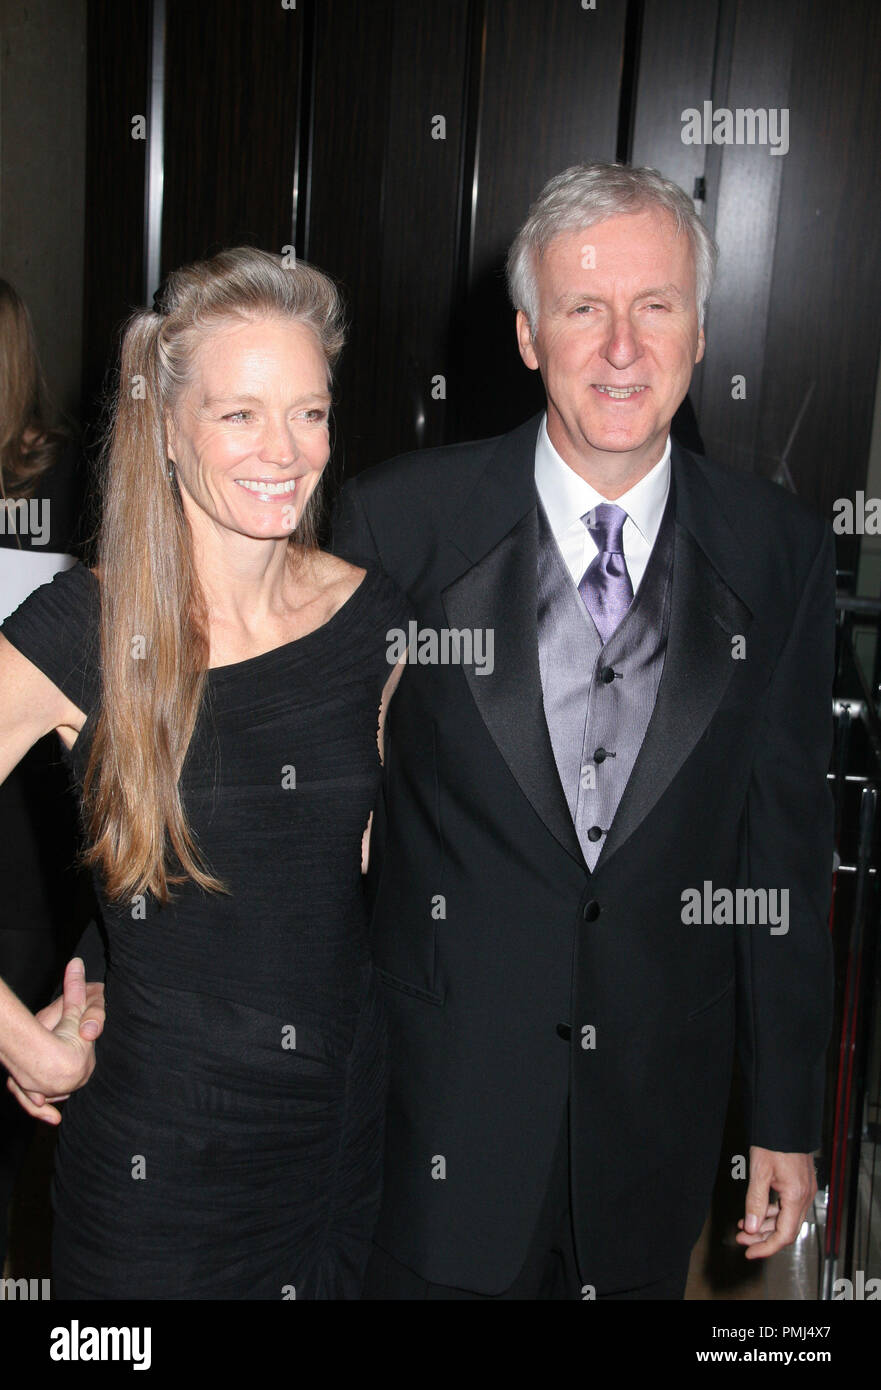 Suzy Amis and James Cameron  01/22/11 '22nd Producer Guild Awards' @Beverly Hilton Hotel, Beverly Hills Photo by Ima Kuroda /www.HollywoodNewsWire.net/ PictureLux Stock Photo